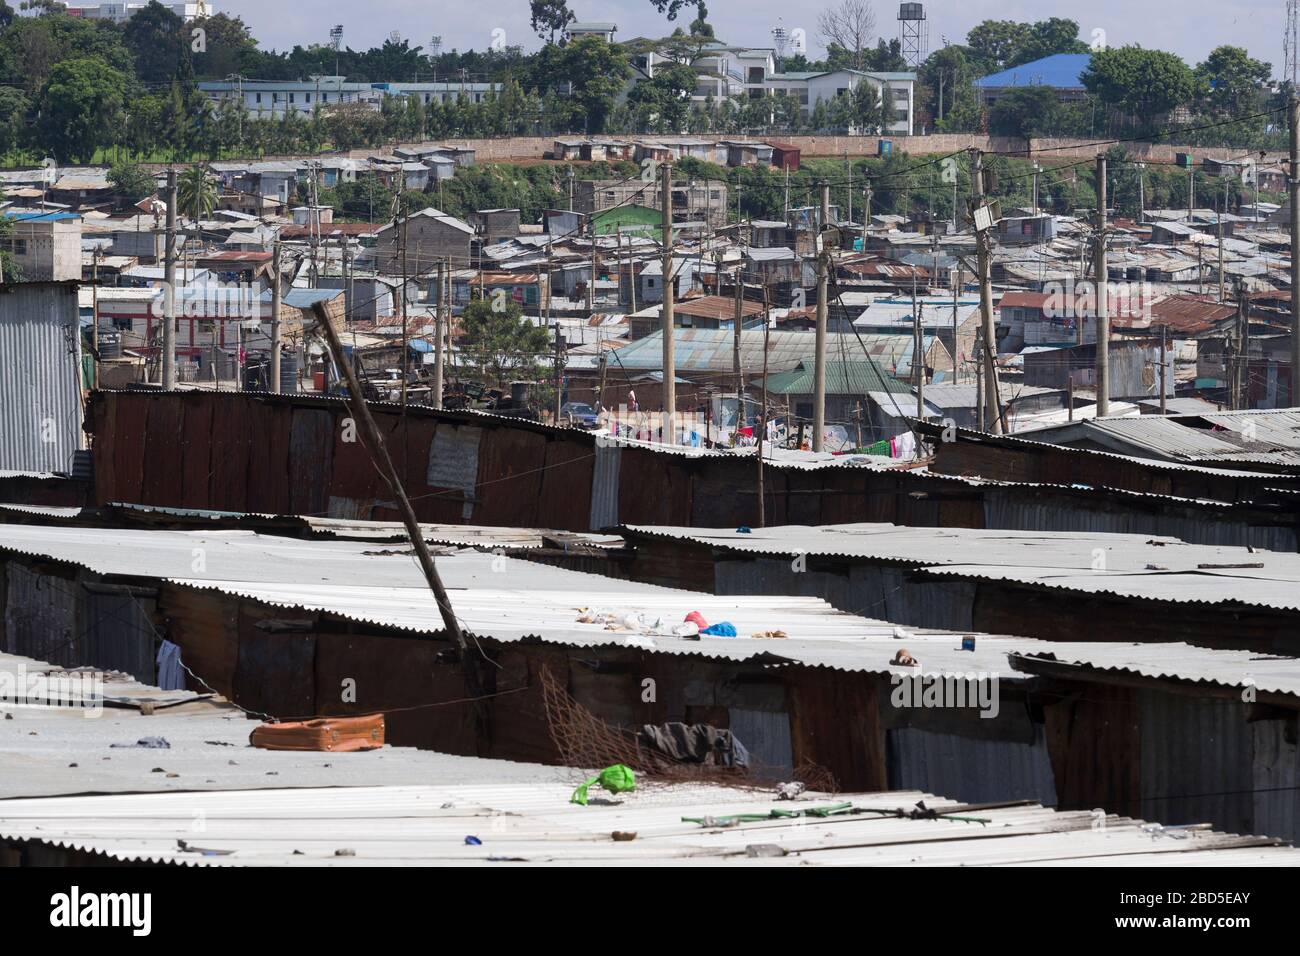 A view across corrugated iron rooftops of Mathare, Nairobi, Kenya.  Mathare is a collection of slums in North East of central Nairobi, Kenya with a po Stock Photo